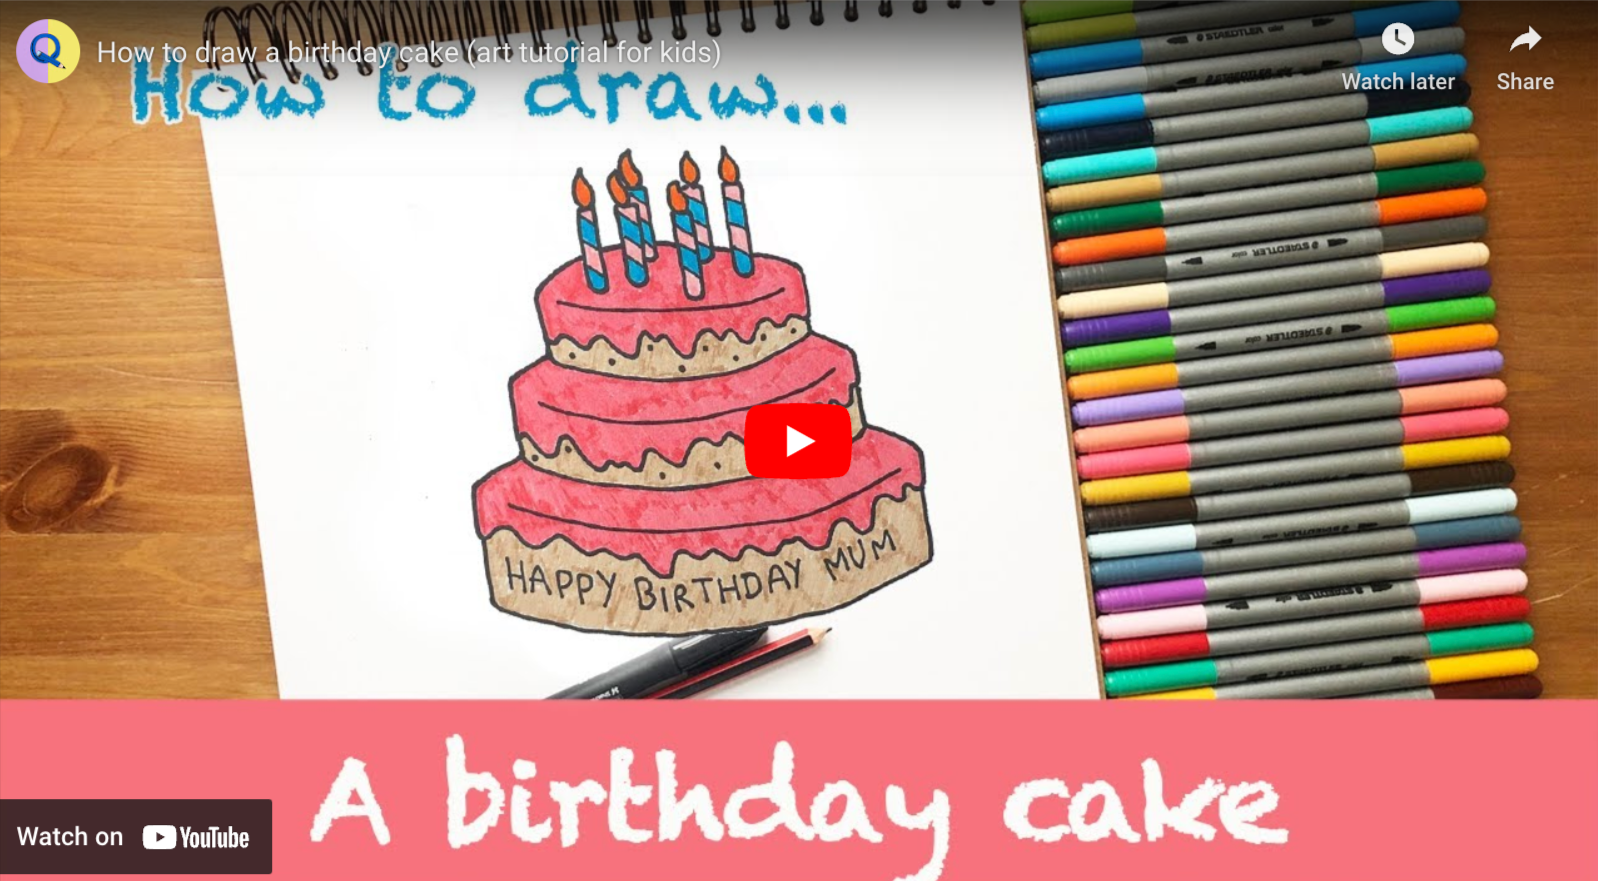 678 Cake Sketch Stock Video Footage - 4K and HD Video Clips | Shutterstock